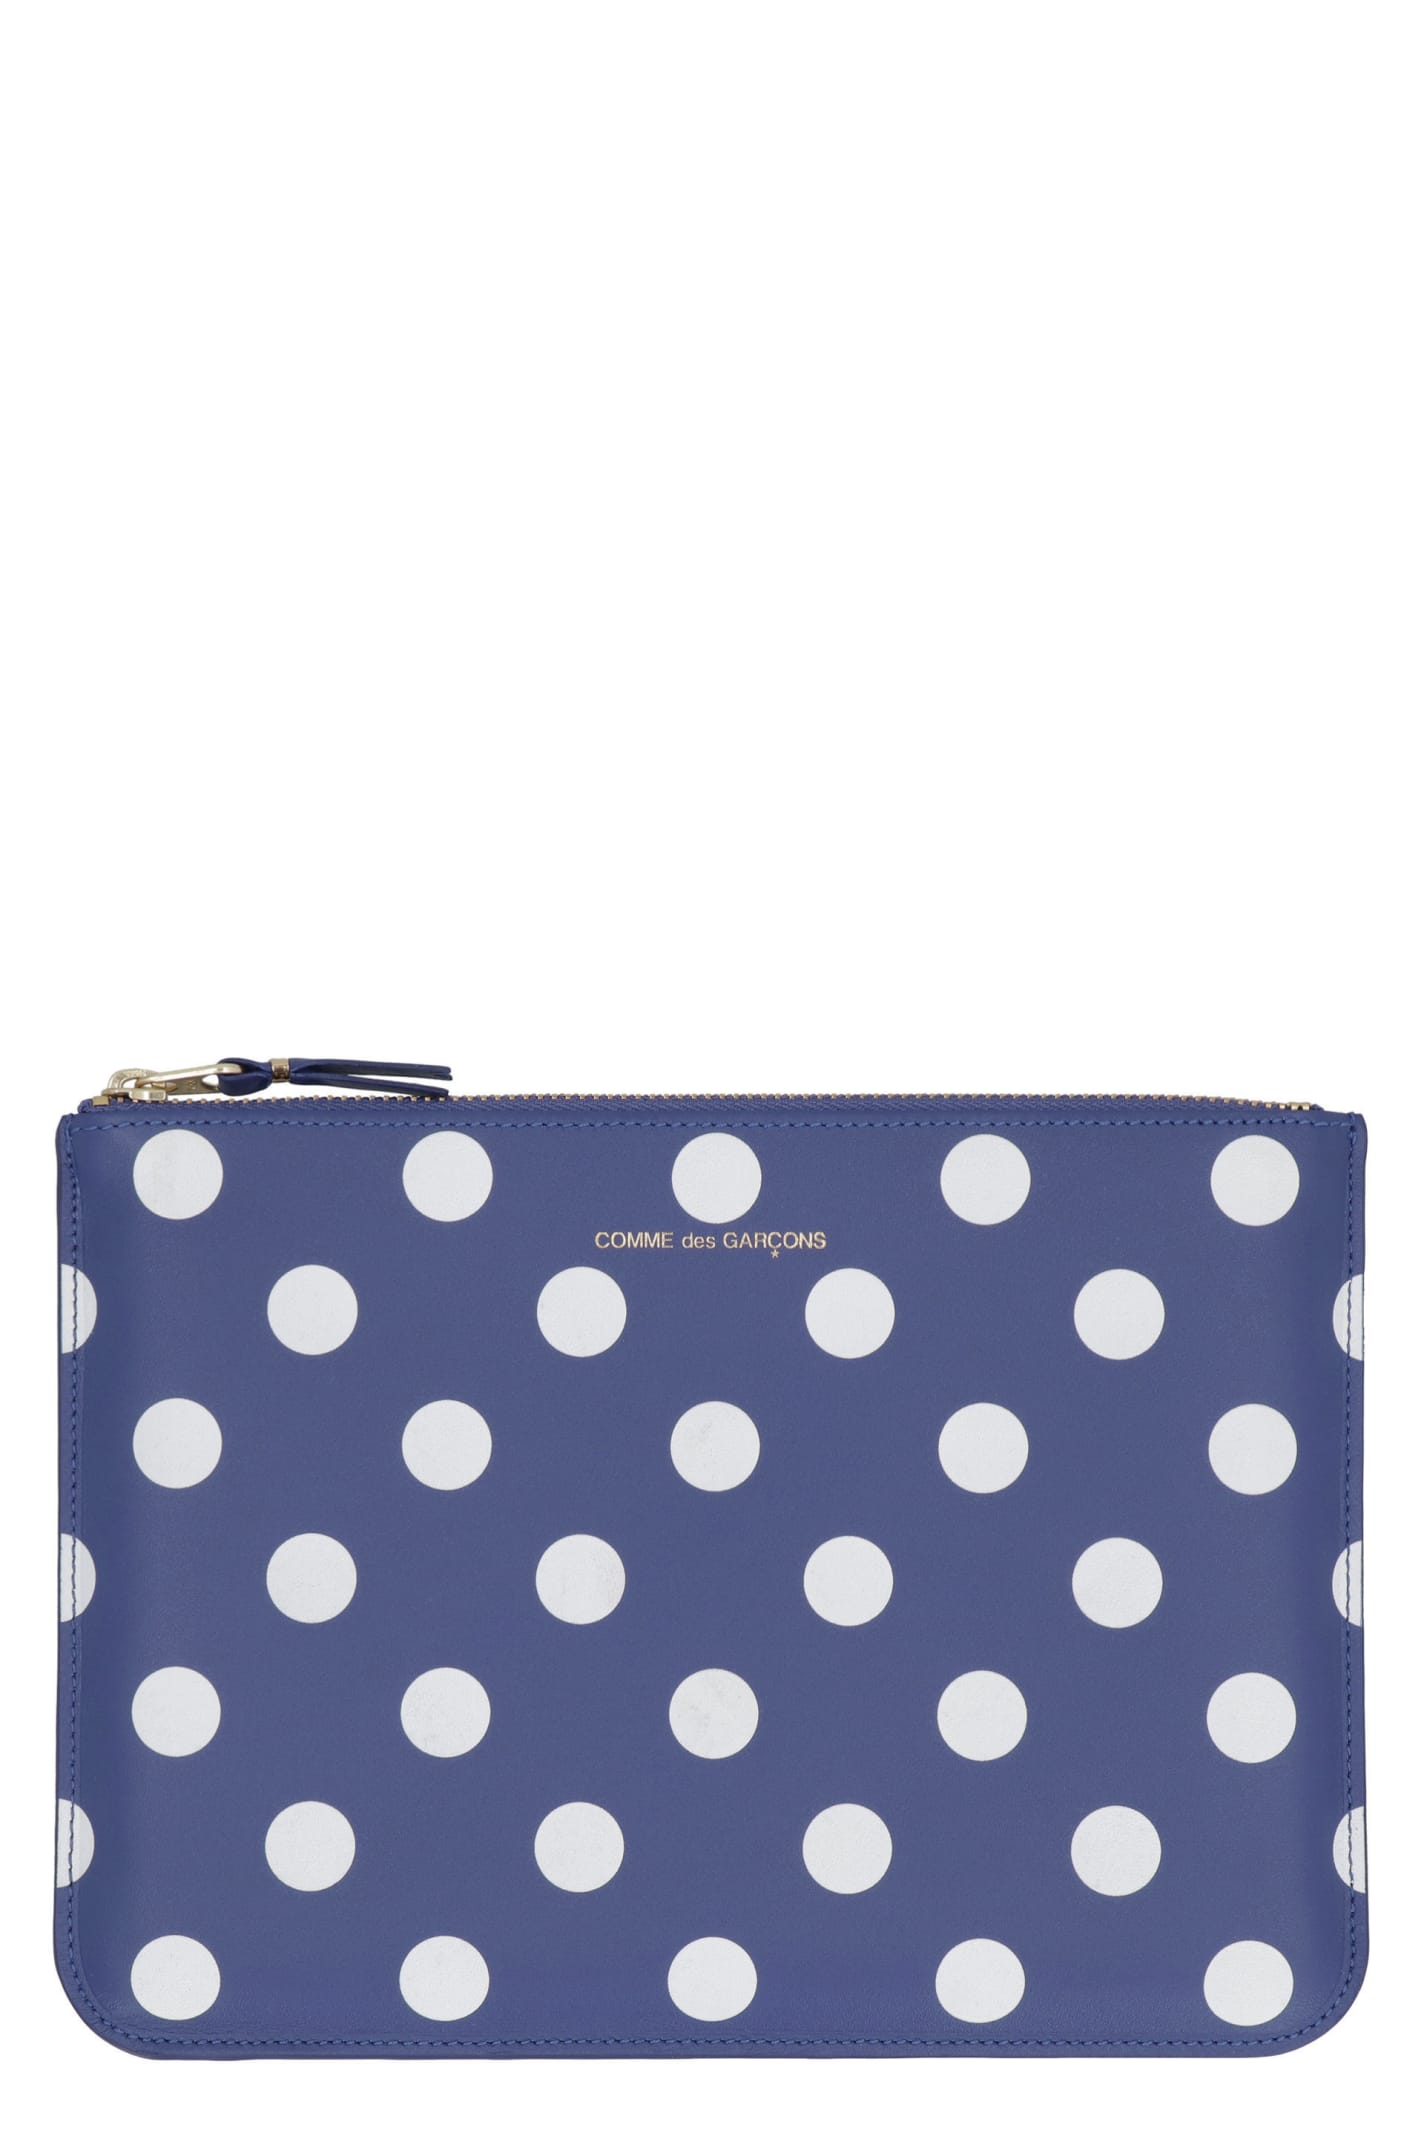 Comme Des Garçons Printed Leather Flat Pouch In Blue